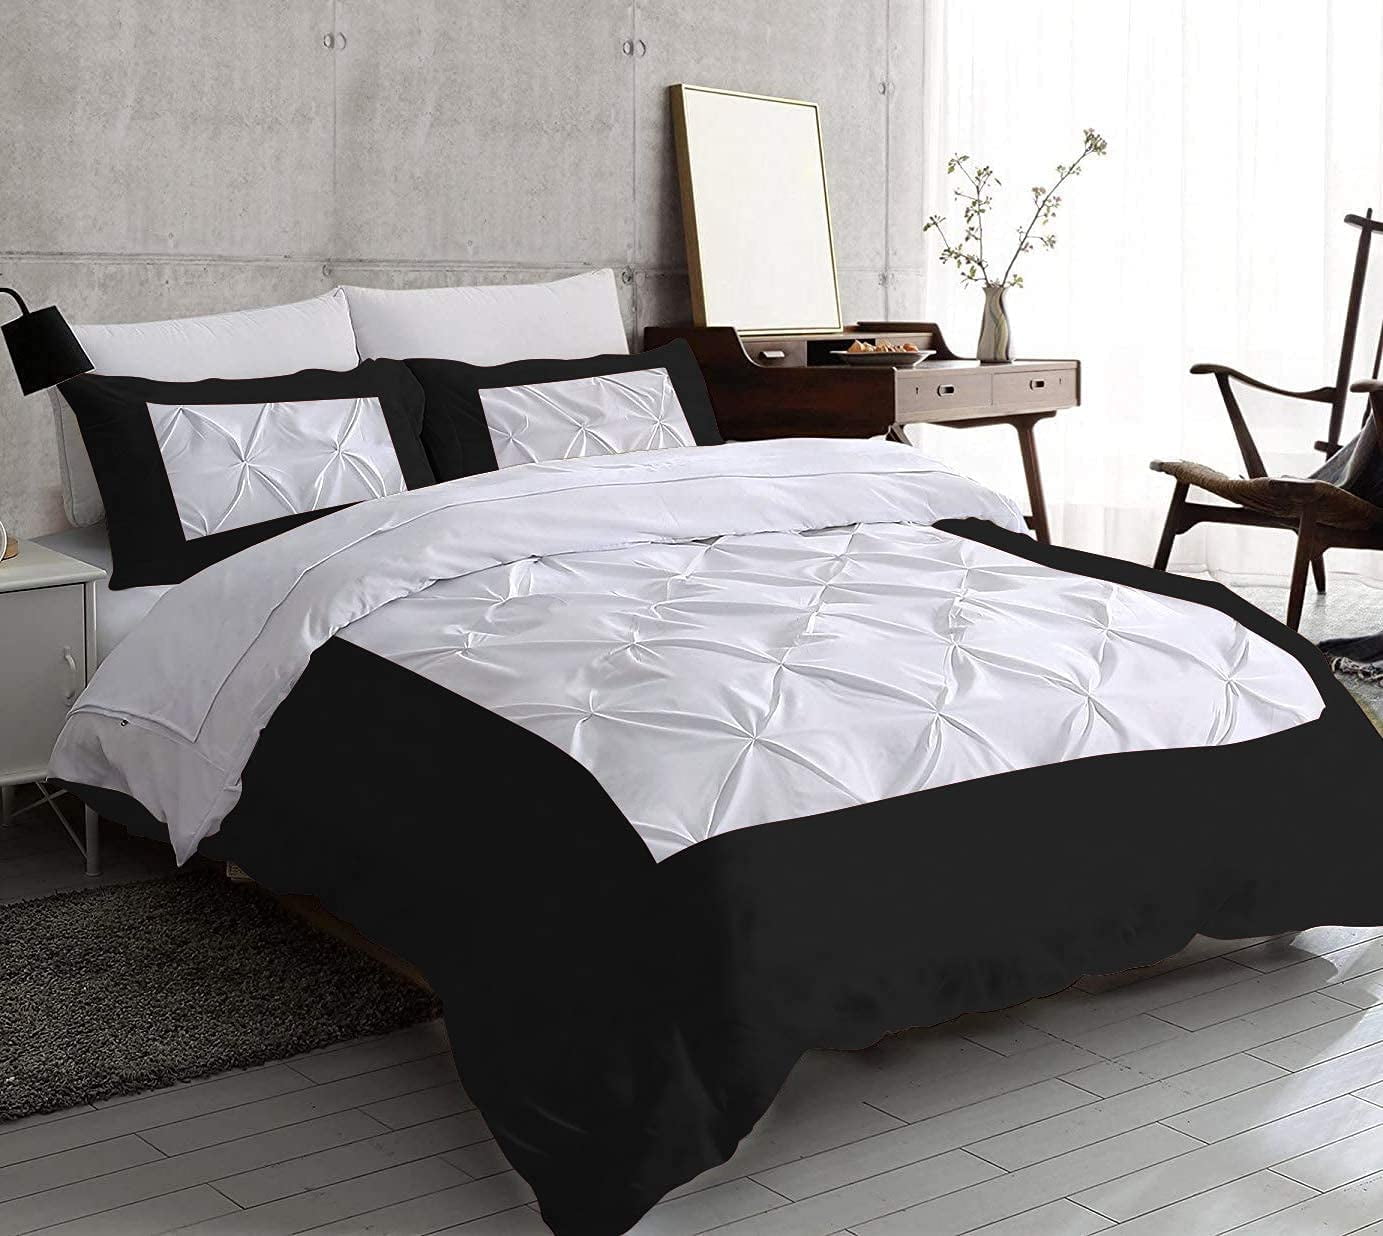 100% Egyptian Cotton Hypoallergenic Ultra Soft 800 Series Pinch Pleated Duvet/Comforter Cover Corner Ties Zipper Inches 68 x 90 Twin XL Black Free 2 Pillow Cases